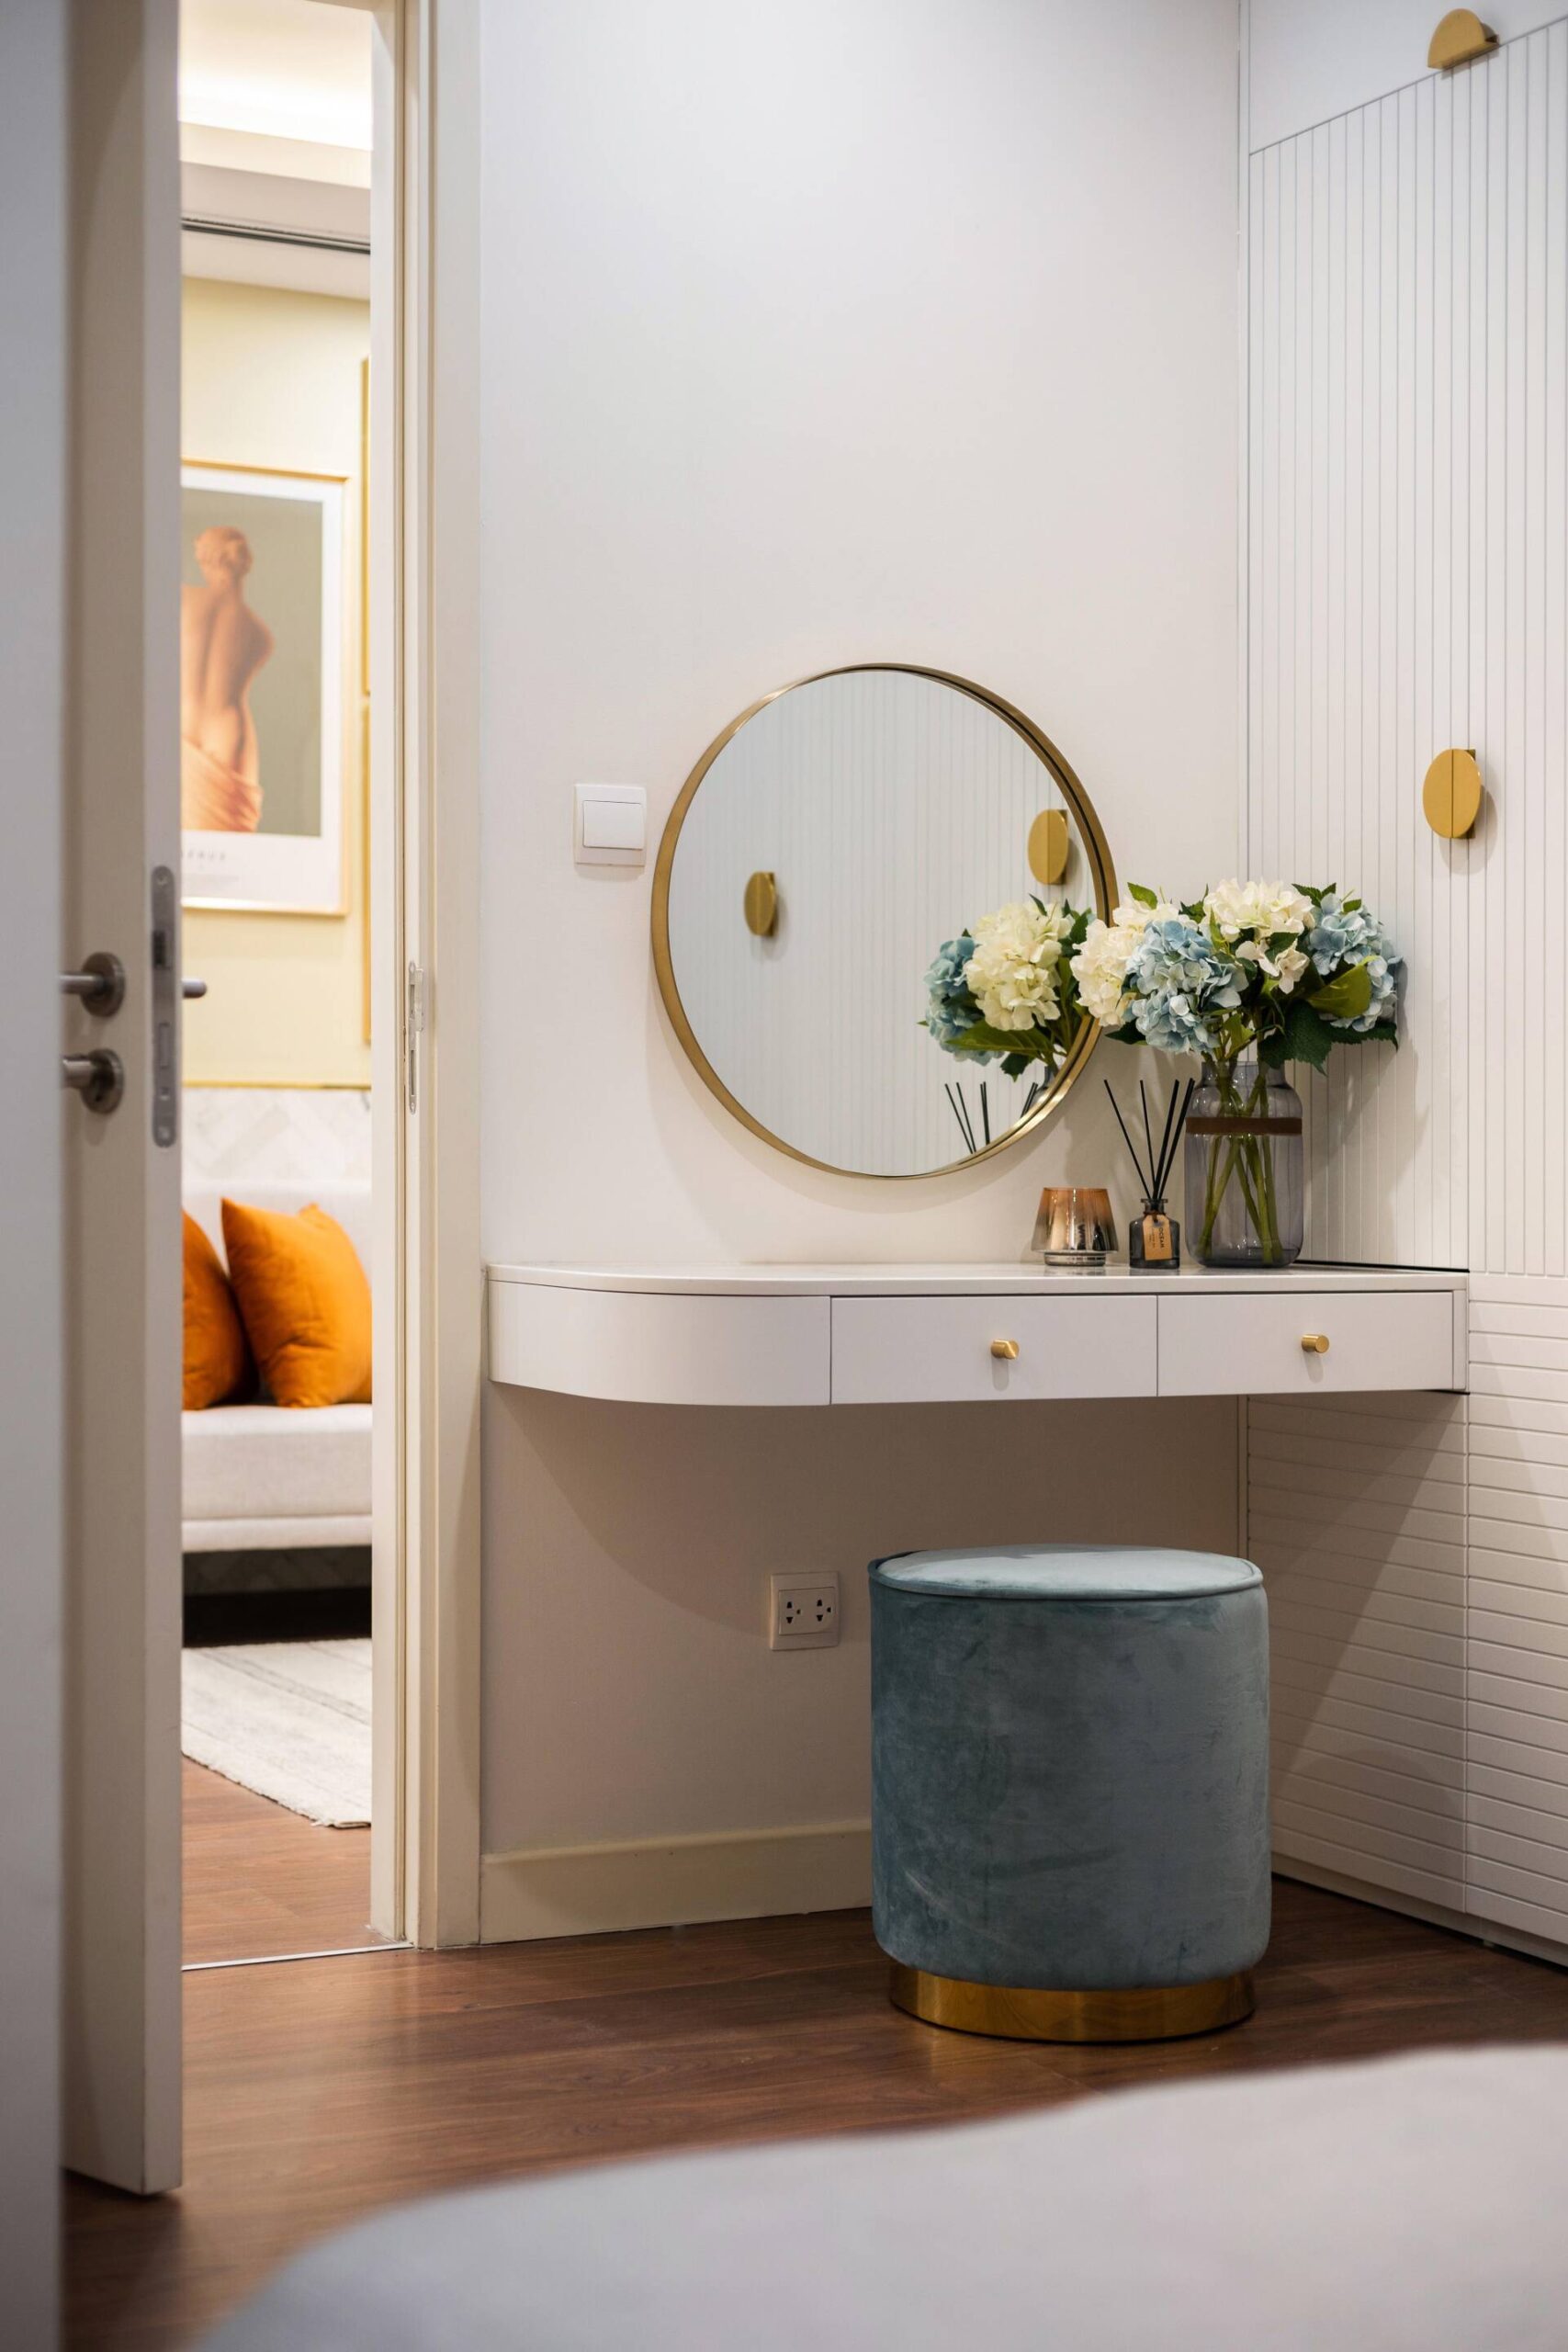 The metallic details appear on handles, headboard, circular makeup mirror to help the space more delicate and luxurious. 